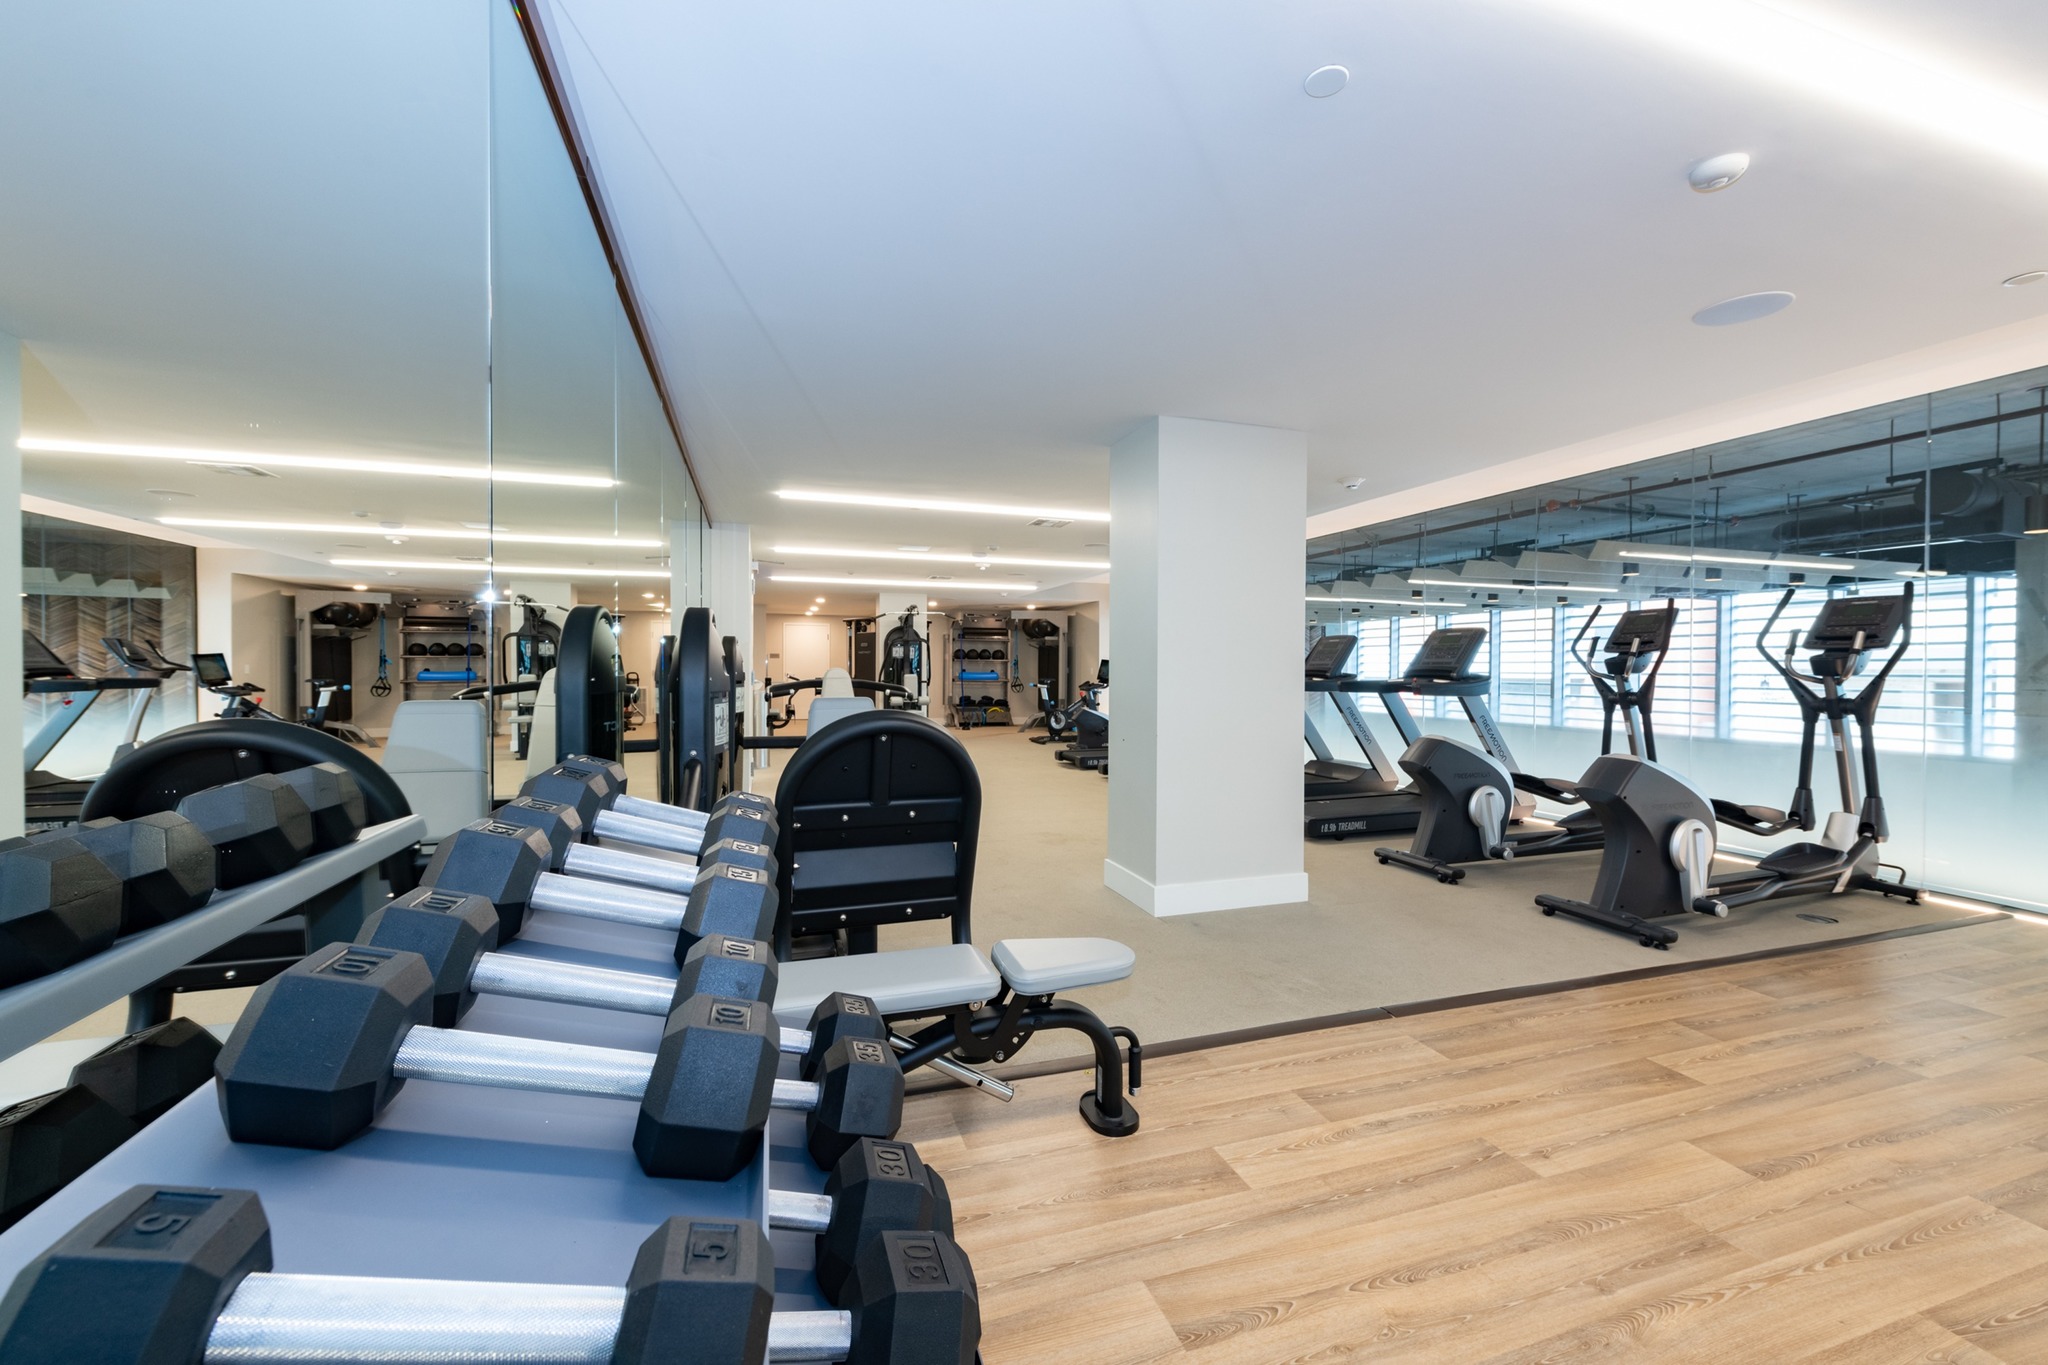 Club-Quality Fitness Studio with Cardio + Weight Stations